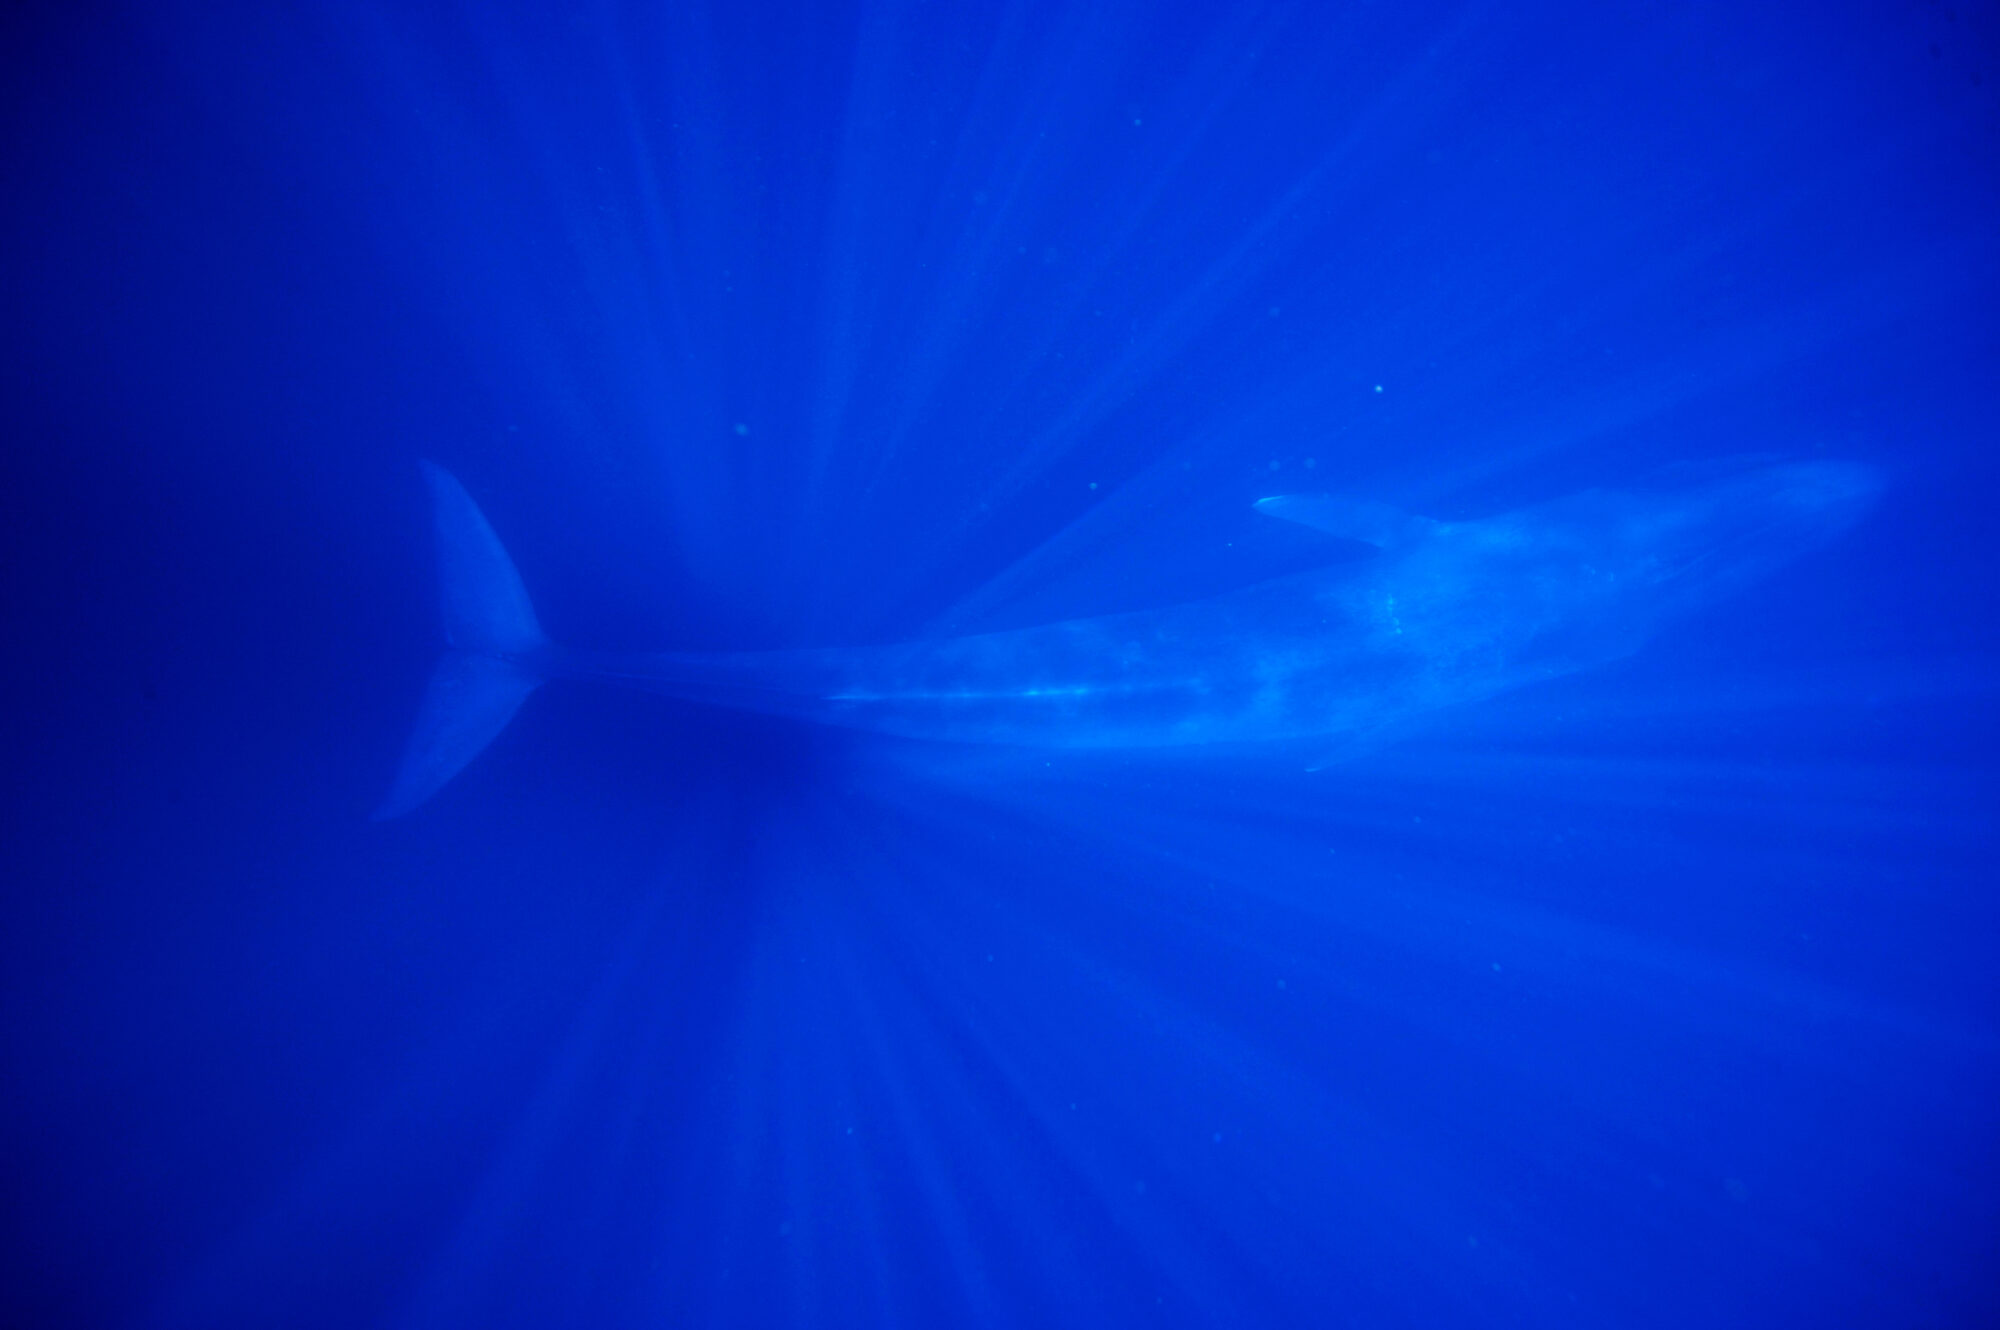 A pygmy blue whale underwater, illuminated by shafts of sunlight